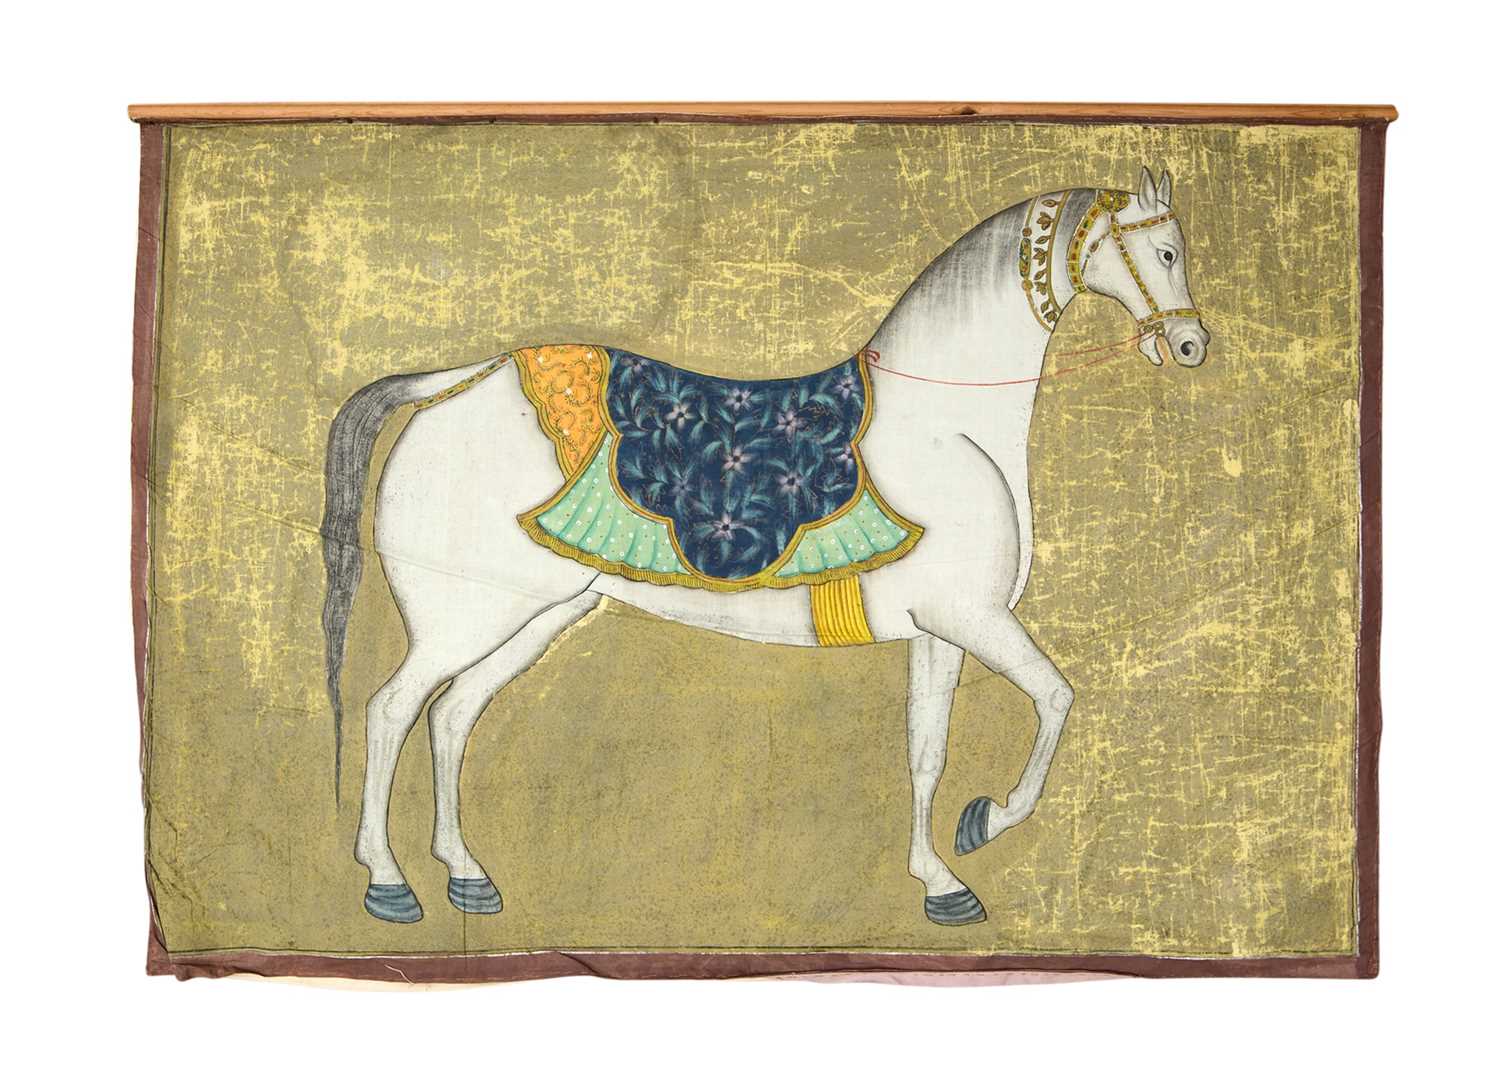 A LARGE EARLY 20TH CENTURY INDIAN GOUACHE ON LINEN PANEL OF A HORSE